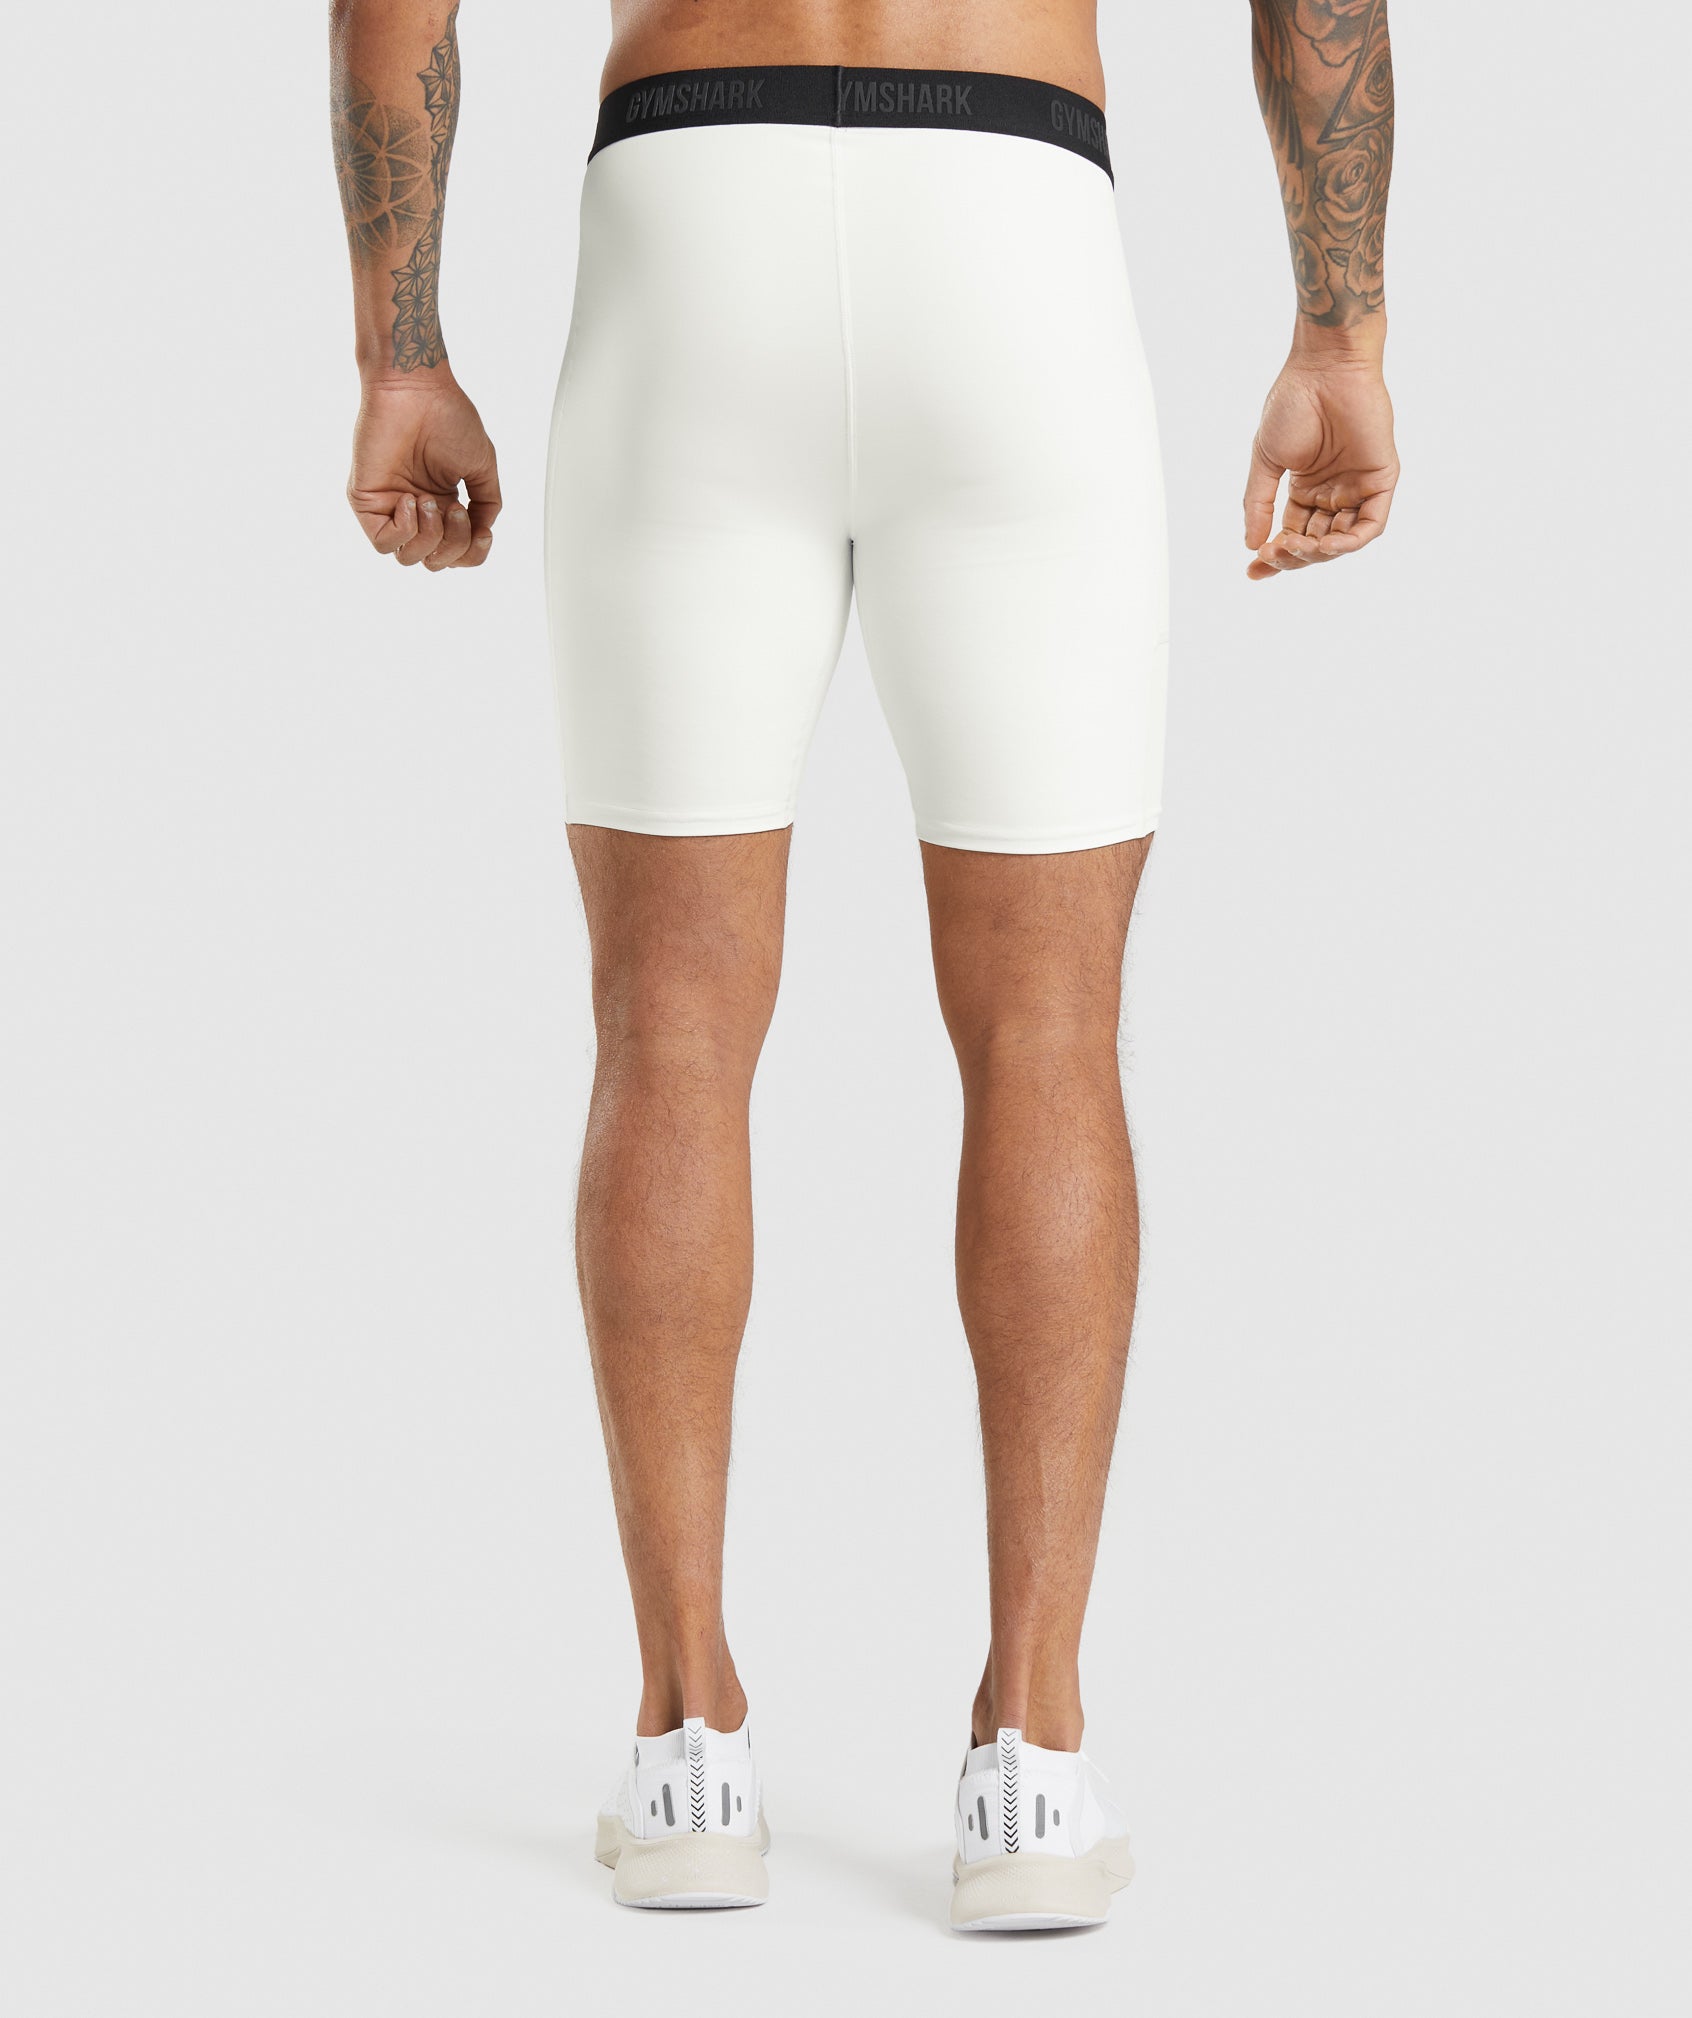 Gymshark//Steve Cook Baselayer Shorts in Off White - view 2